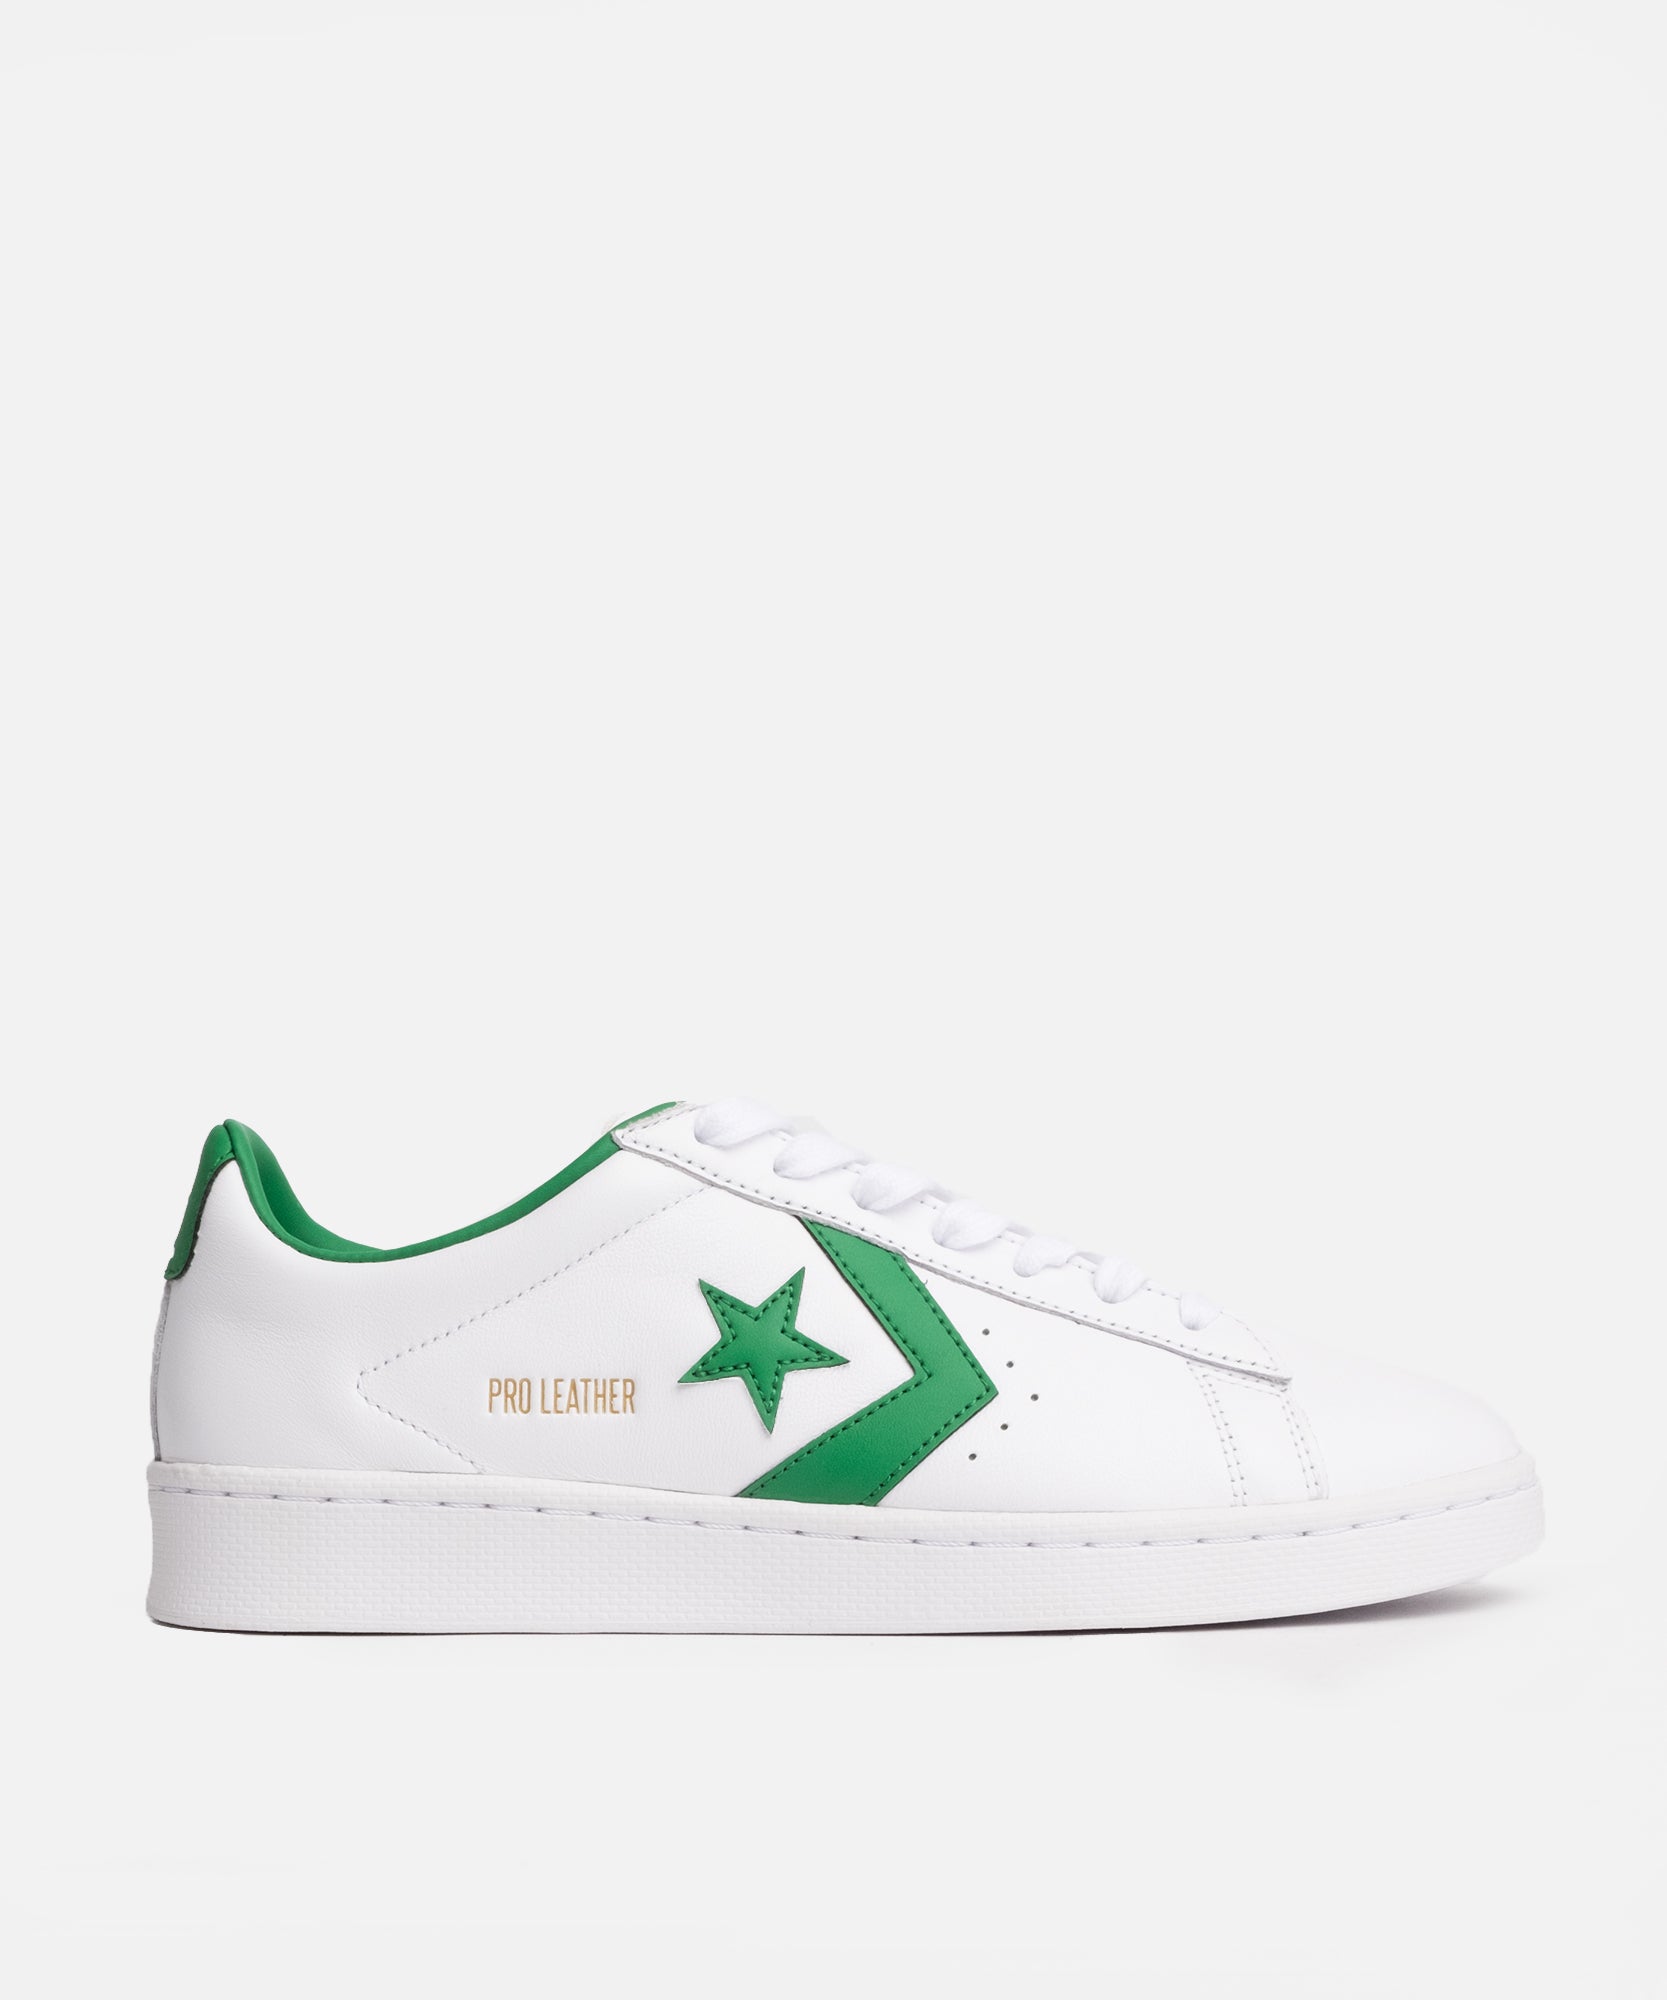 converse pro leather green white